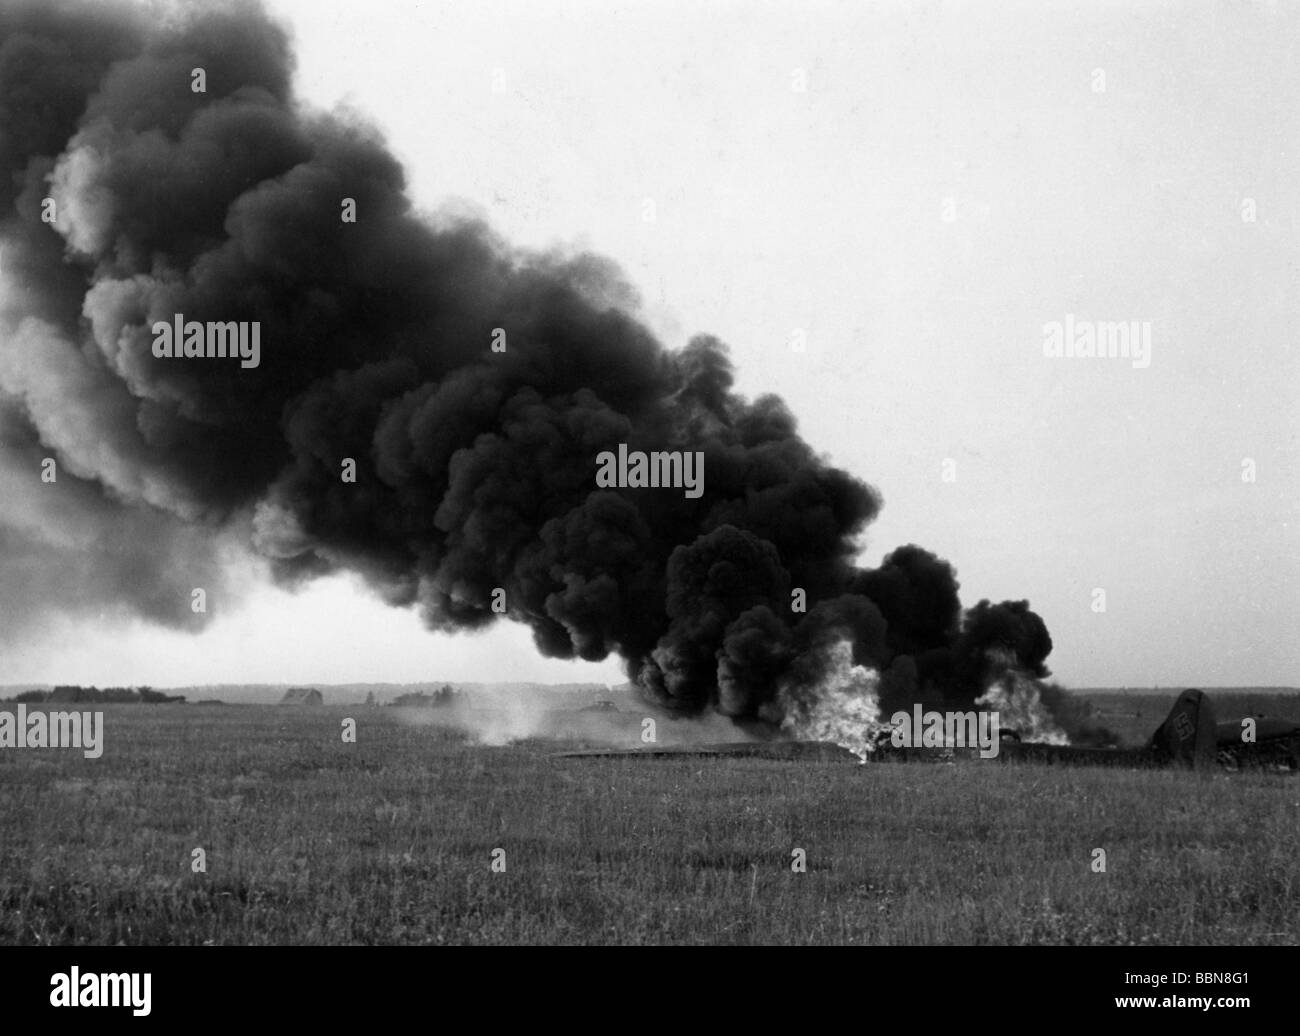 events, Second World War / WWII, aerial warfare, aircraft, crashed / damaged, burning remains of two German planes that collided during takeoff, Eastern Front, 13.7.1941, fuselage of a close reconnaissance aircraft Focke-Wulf 189 'Uhu', Stock Photo